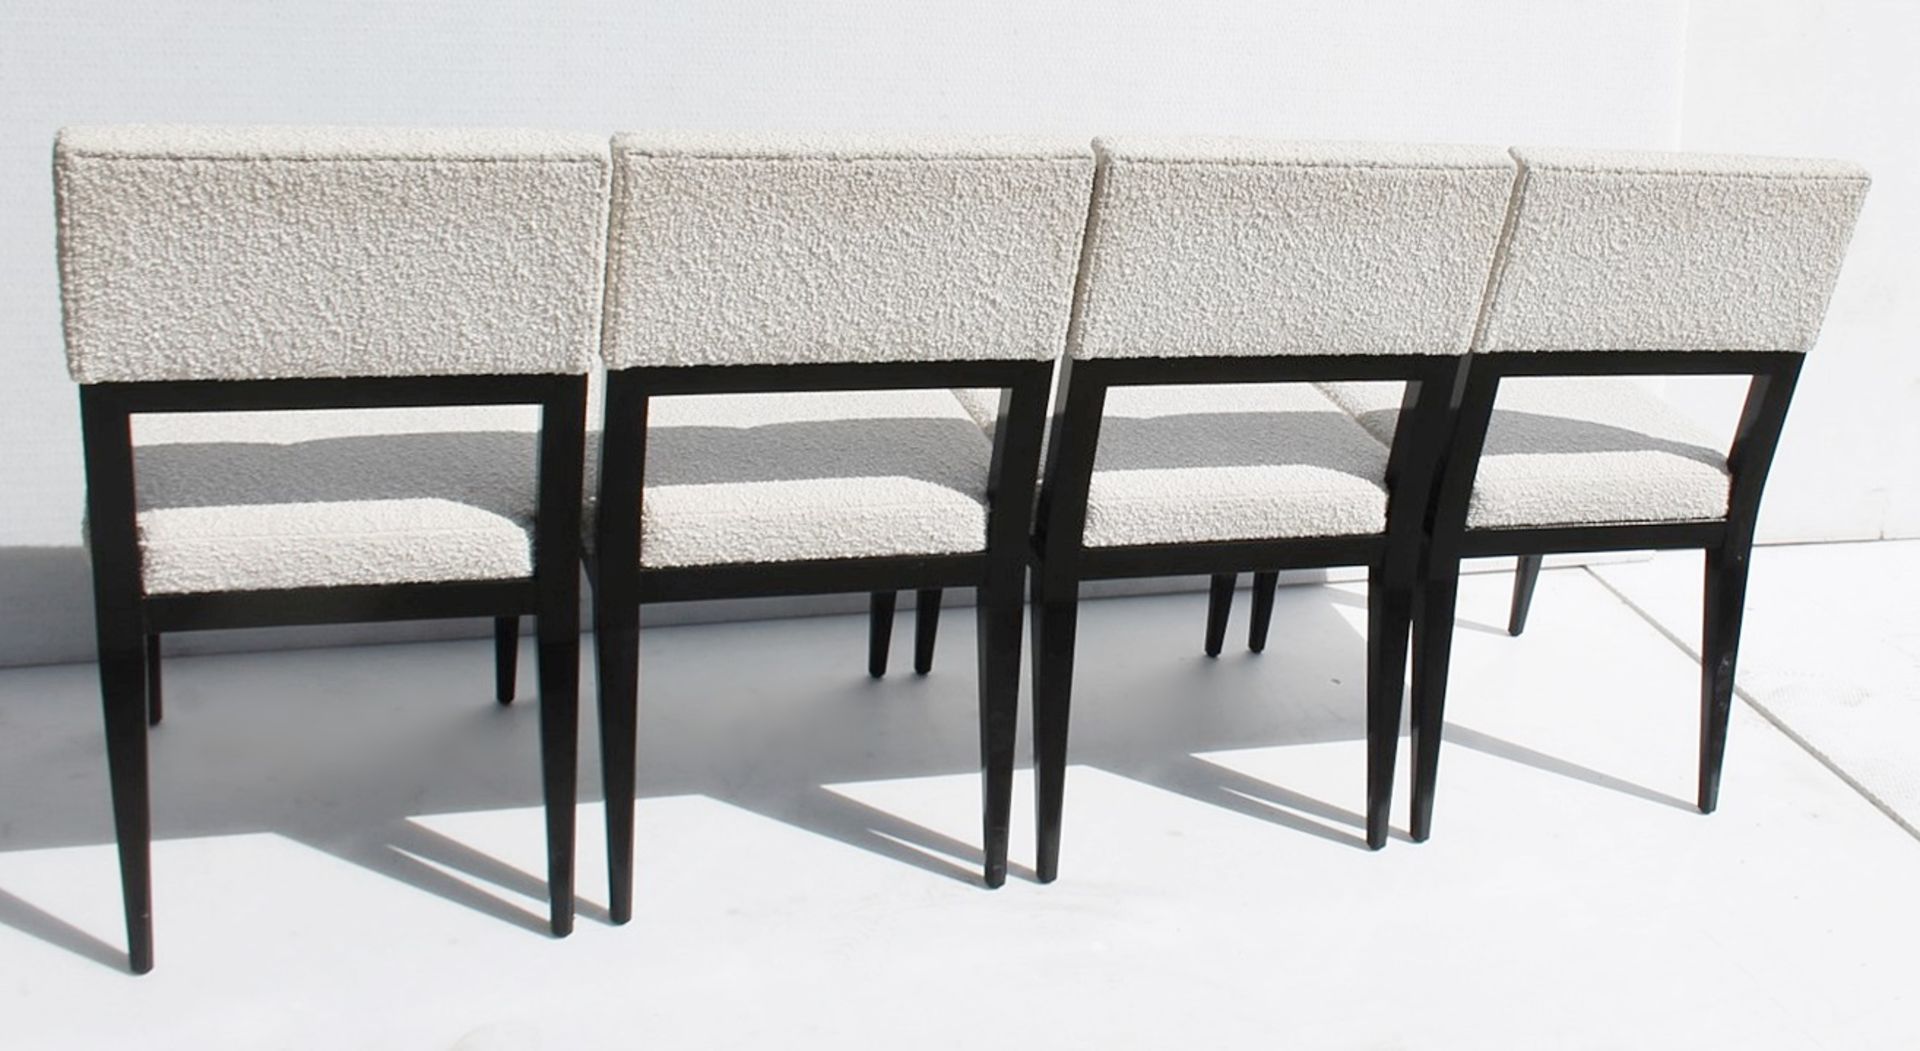 8 x AMY SOMERVILLE LONDON 'Resplendent' Bespoke Dining Chairs - Total Original Price £25,920 - Image 9 of 18